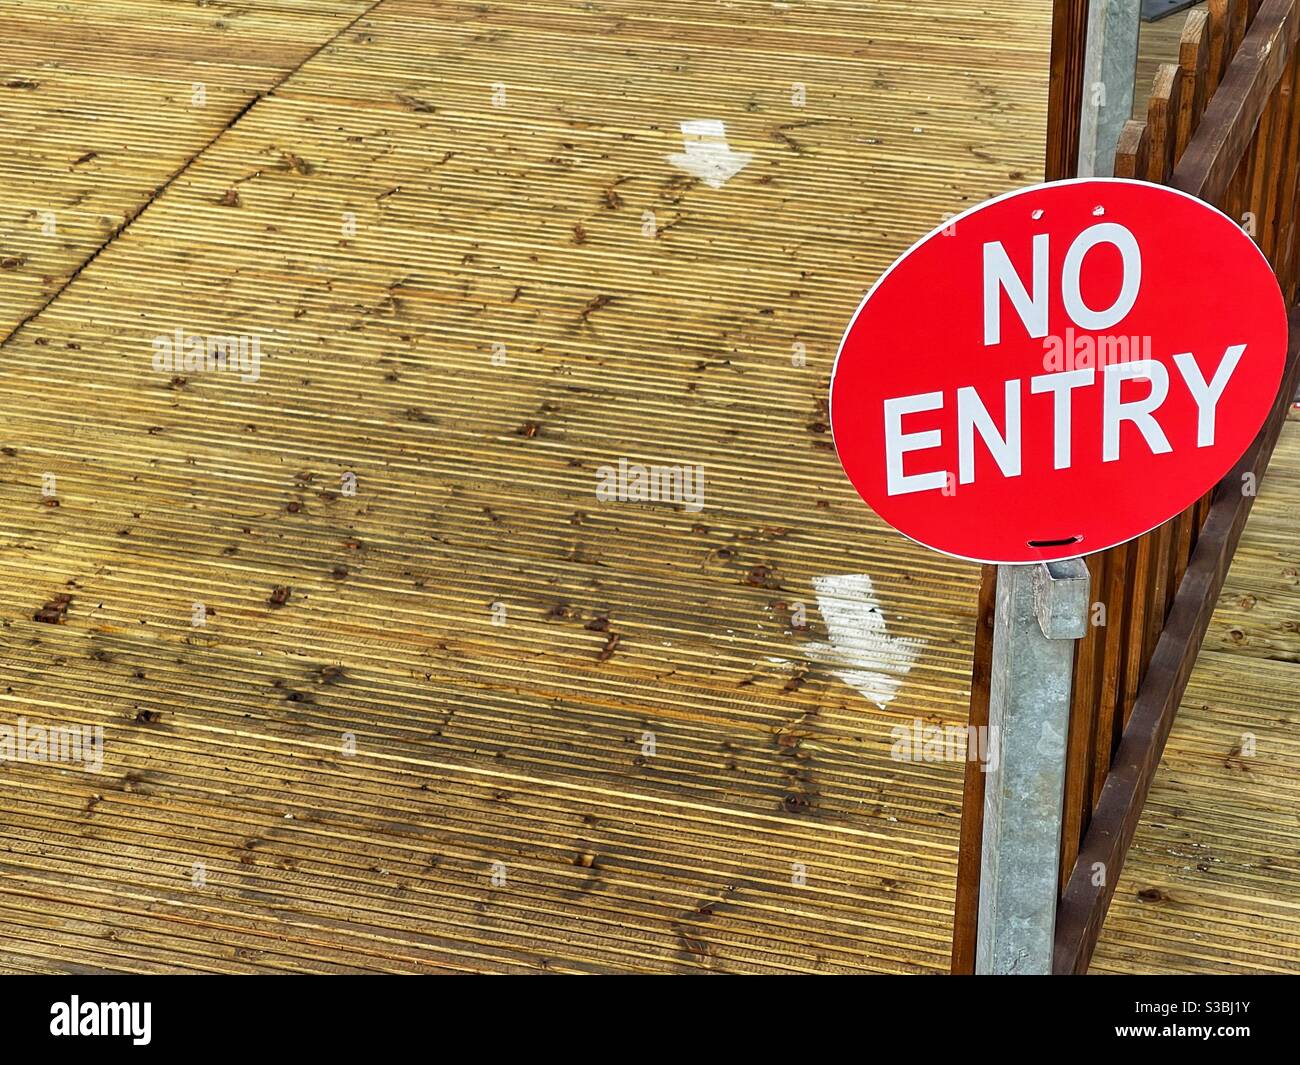 No entry sign at exit to deck area Stock Photo